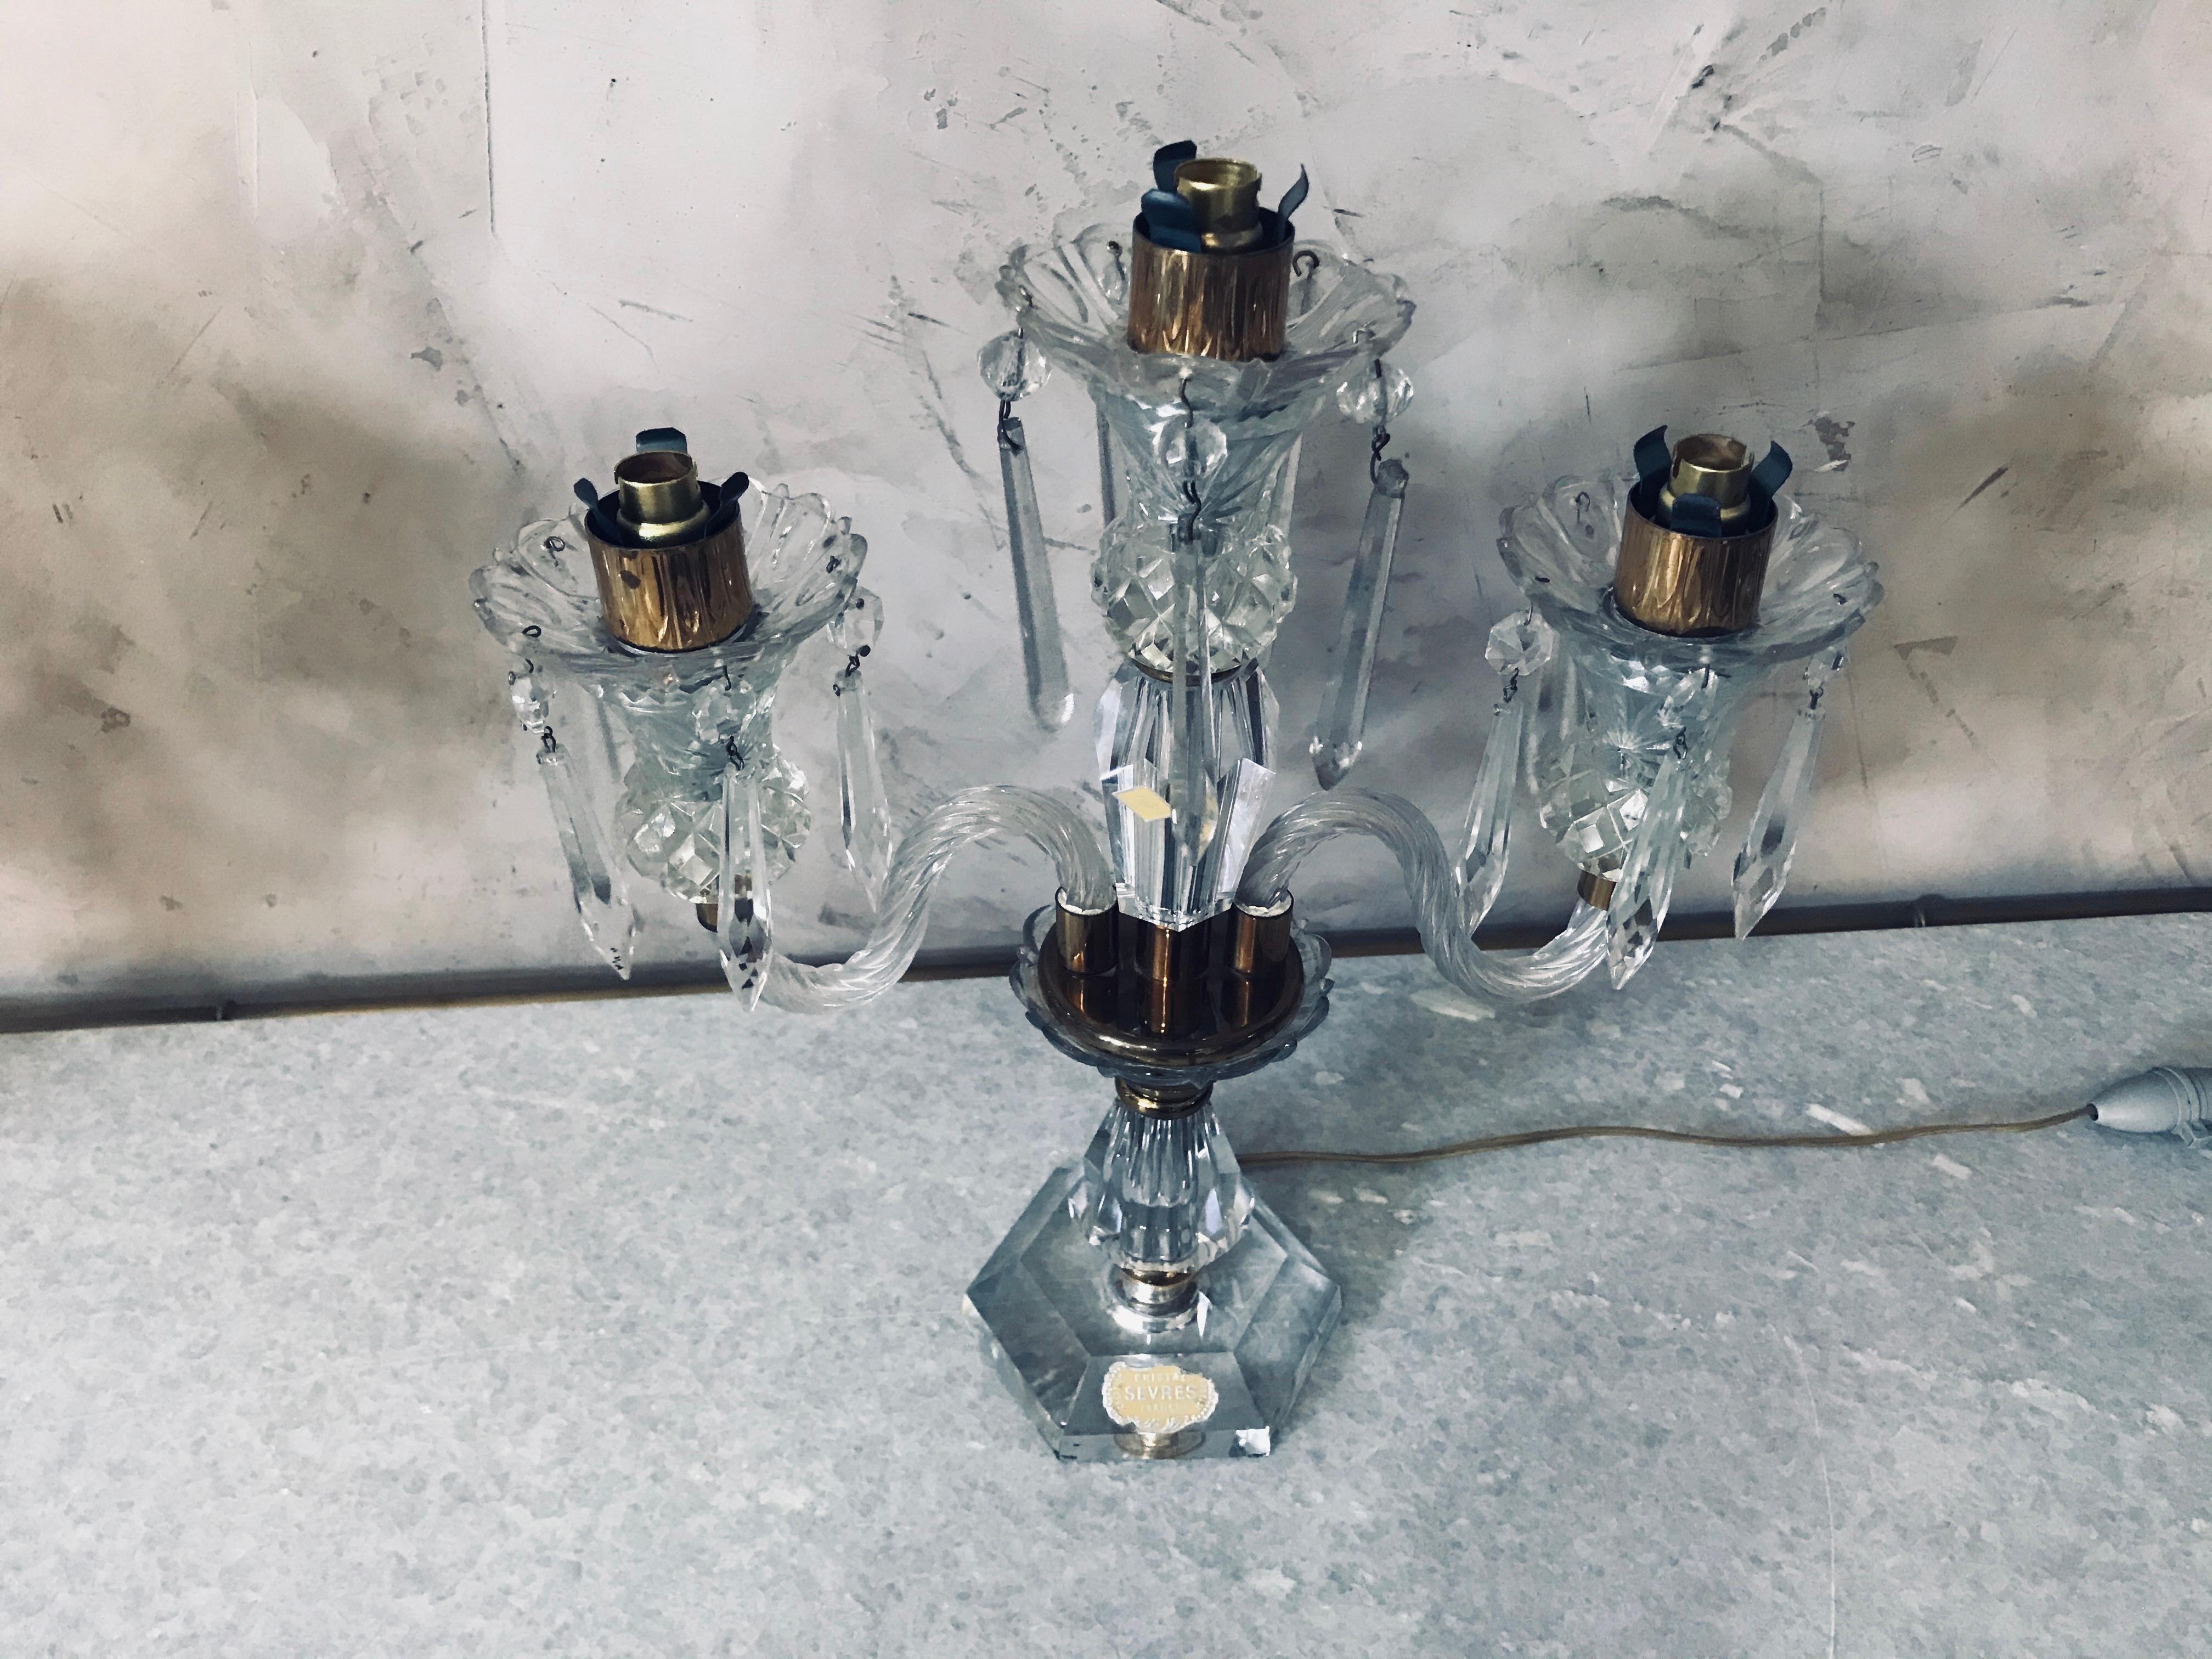 Beautiful 20th century French pair of crystal and brass Sèvres candelabra from the 1950s.
Made in France by the famous Cristallerie House Sèvres. 
This pair of candelabra are electrified and has three lights each. 
Stamp of the house Sèvres on